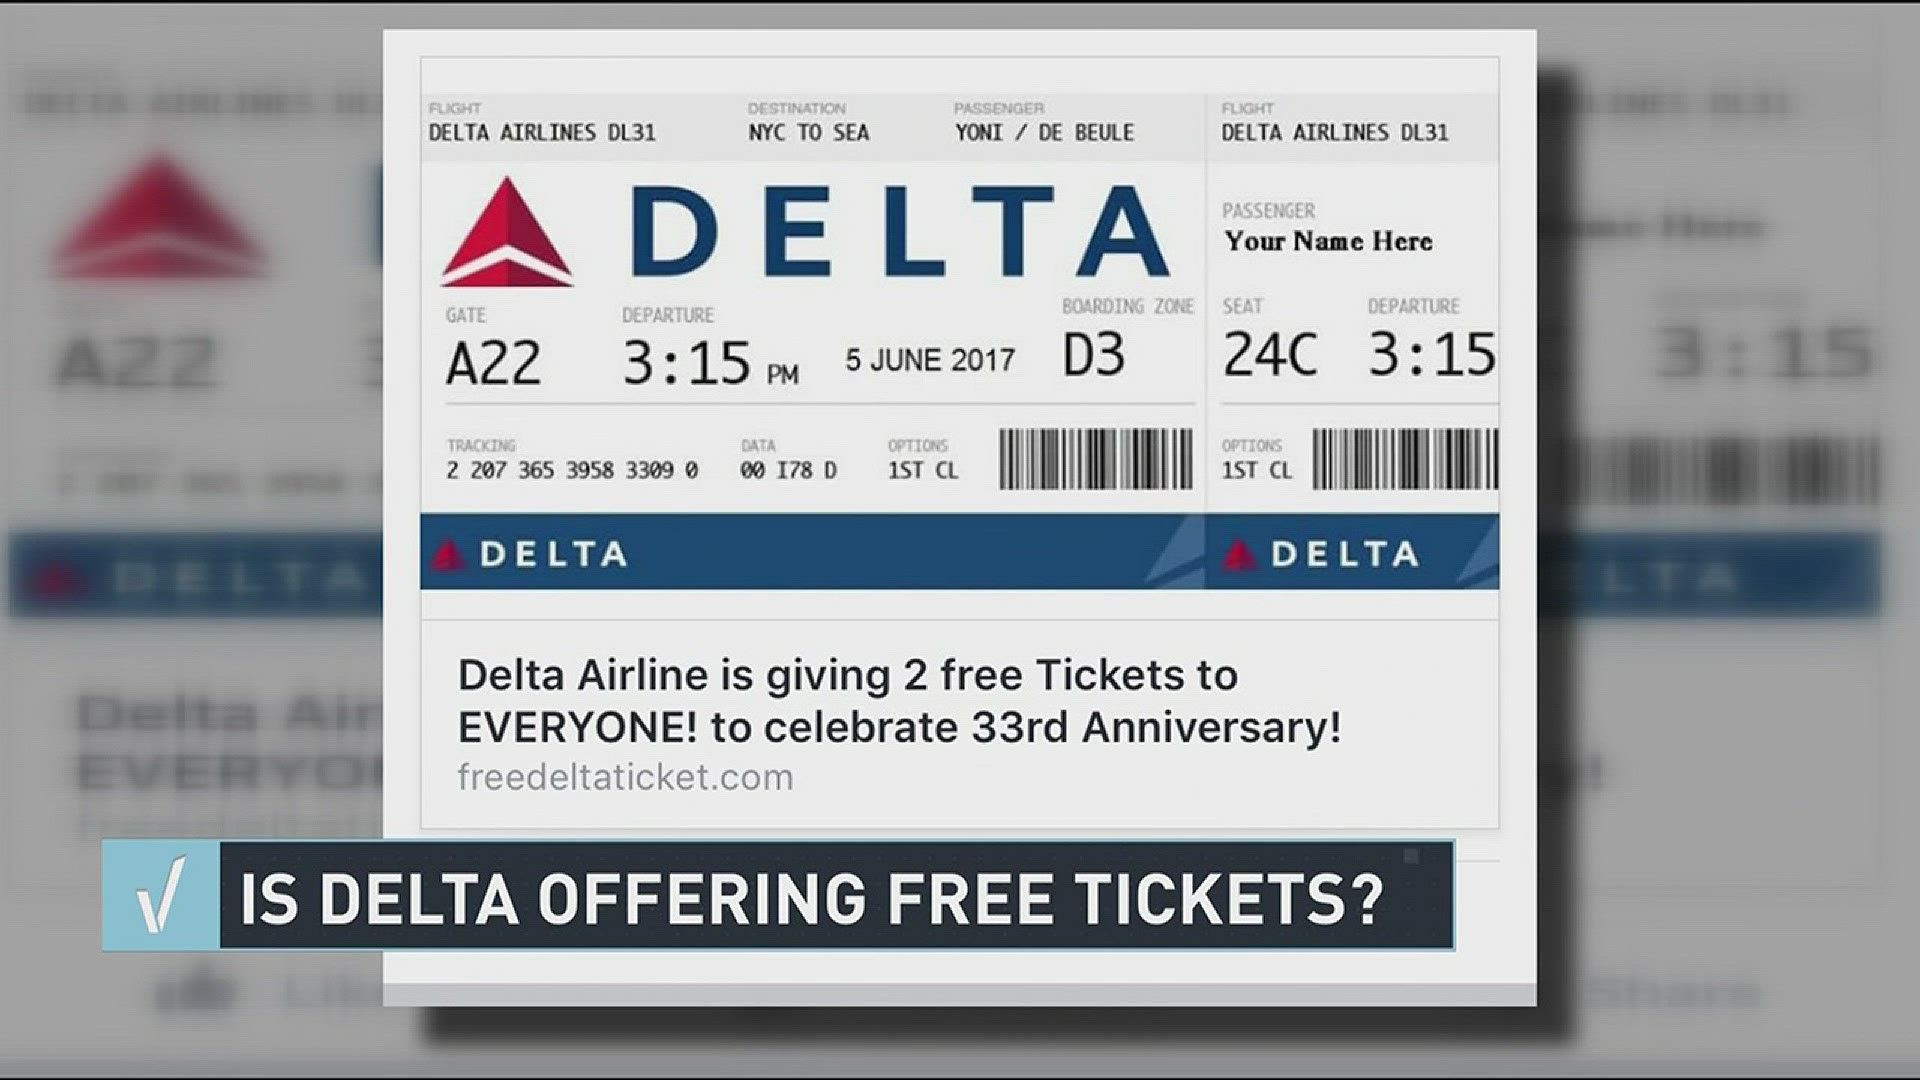 Online posts going around seem to show a great deal celebrating Delta's anniversary, but is it authentic?